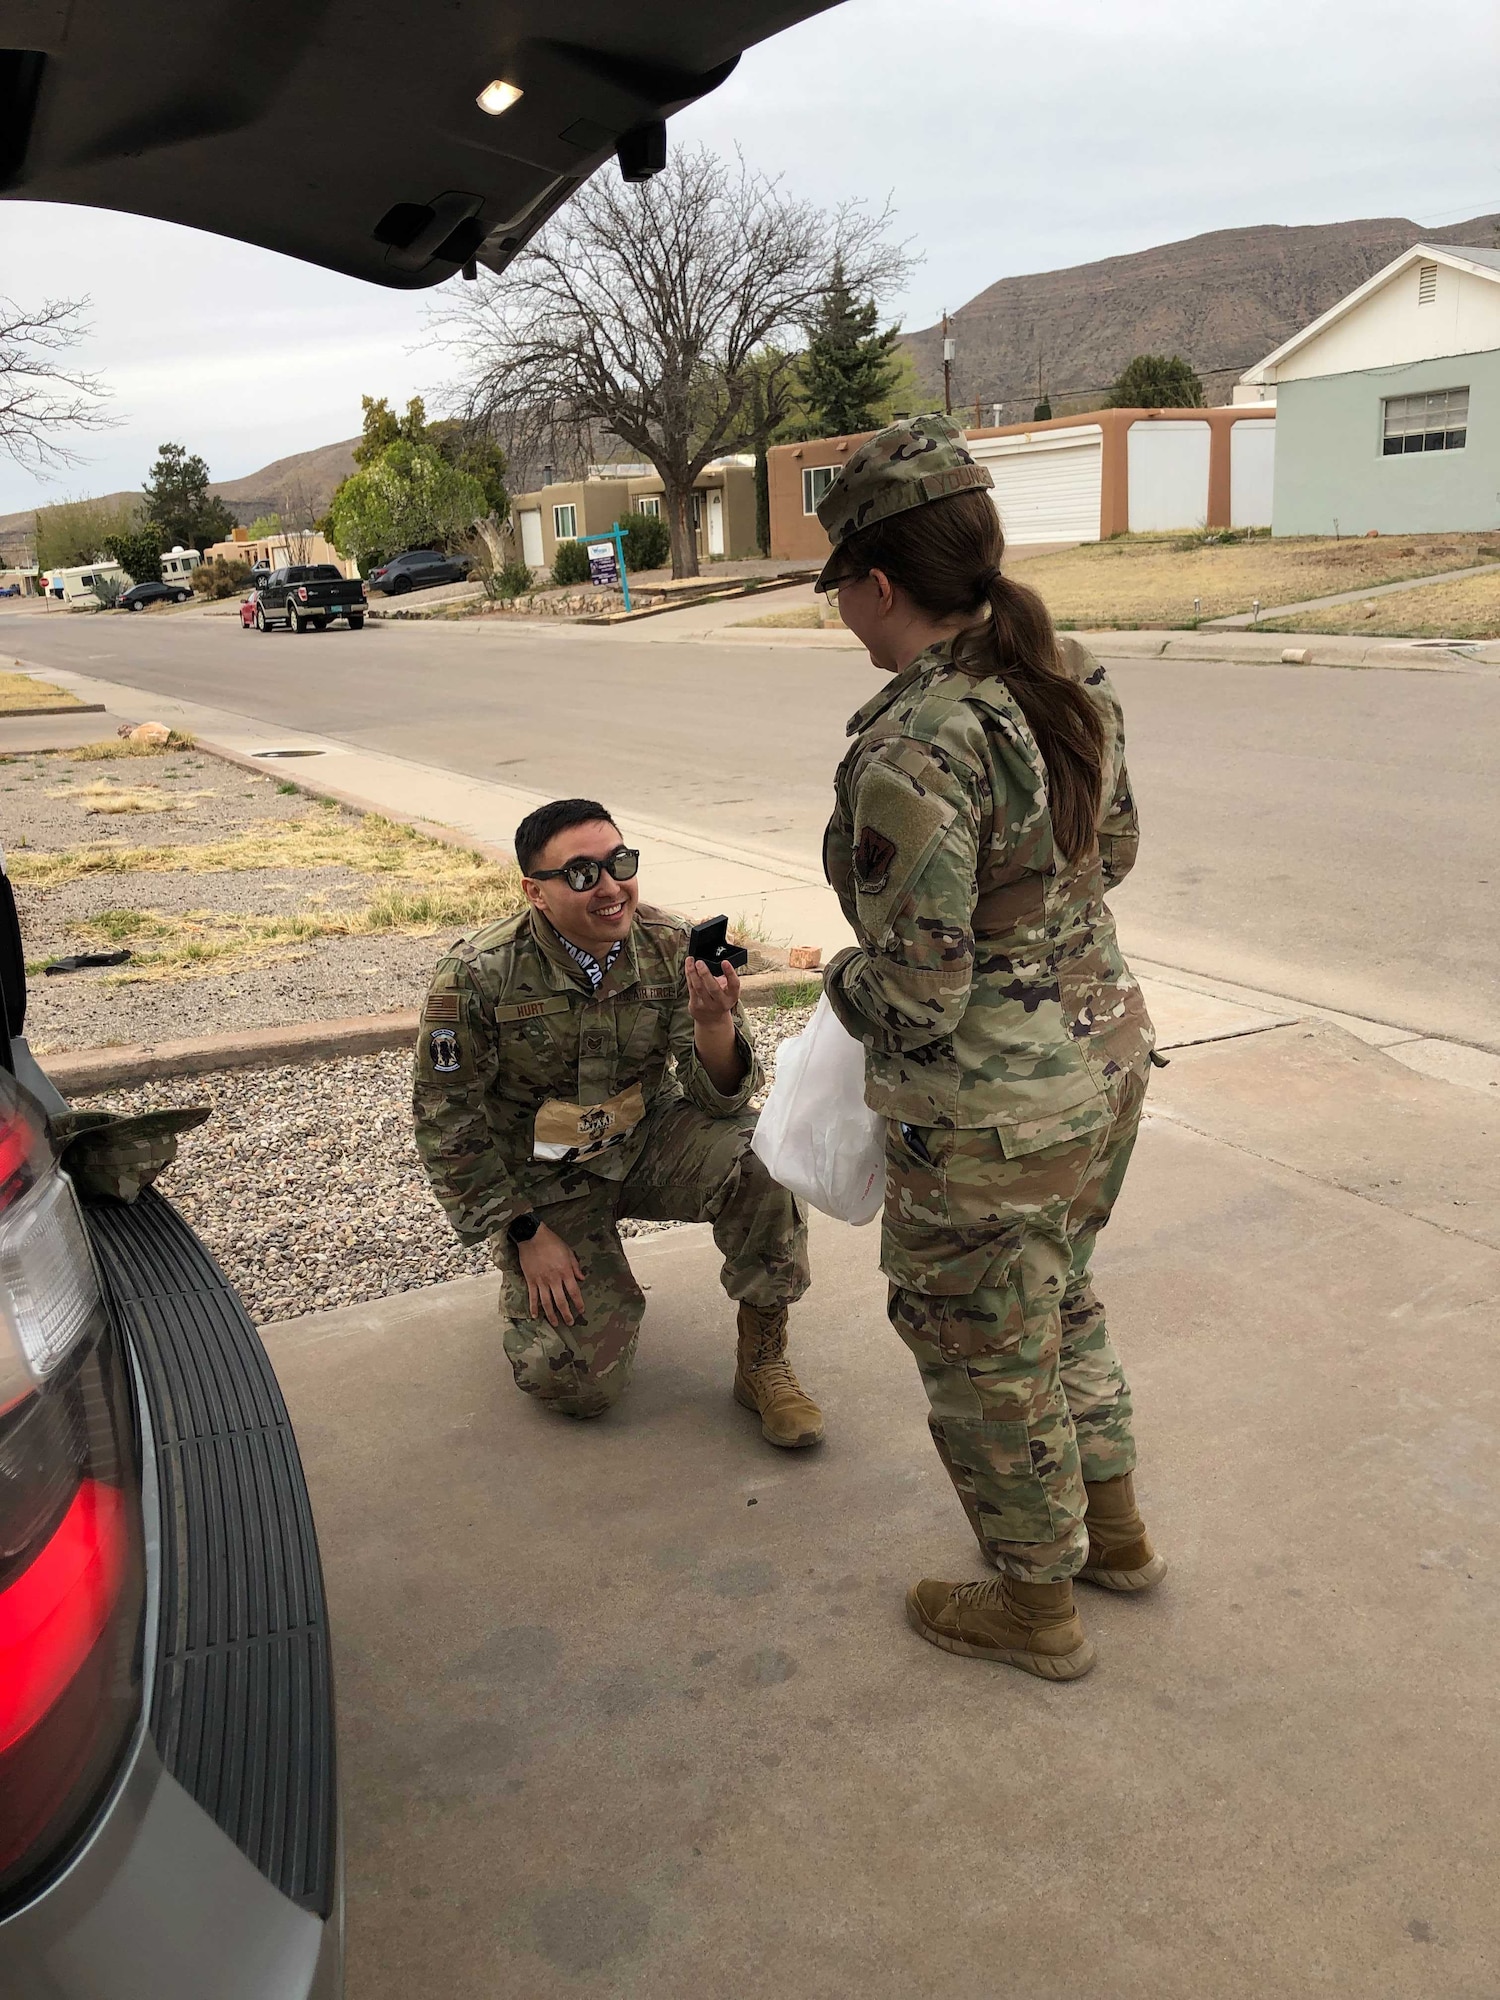 TSgt Joshua Hurt proposes to fiancé, SSgt Misty Younce in Alamogordo, New Mexico, after the Bataan Memorial Death March. She said, “Yes!”